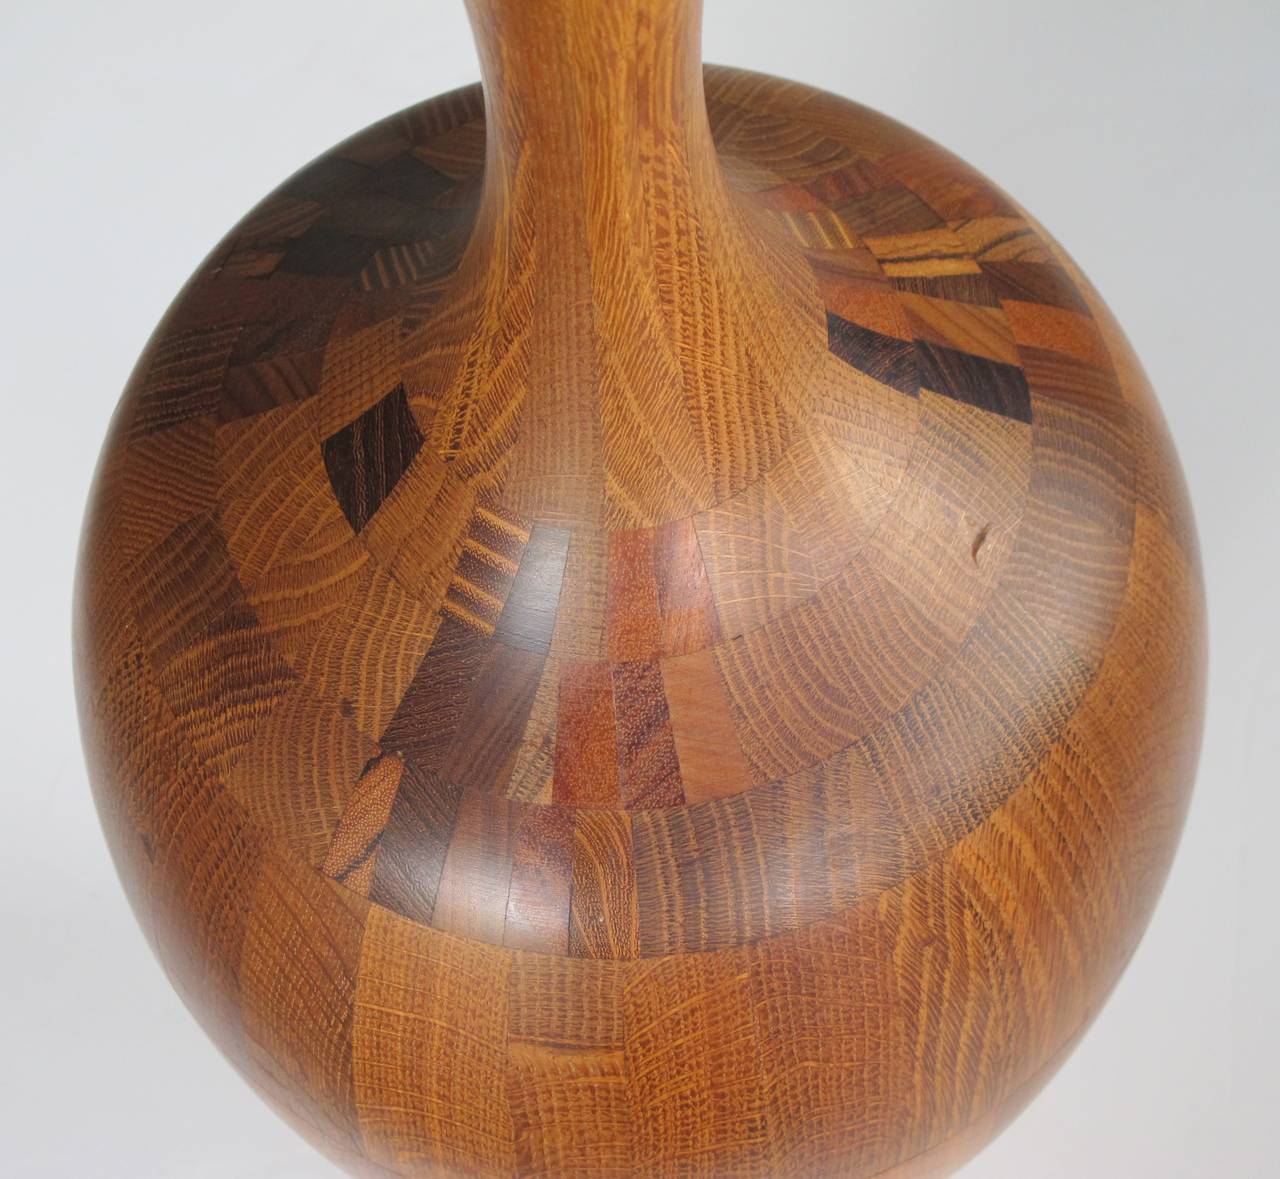 A large-scaled and well-executed French mid-century laminated and turned wooden urn; with slender flaring neck above an ovoid body; composed of various laminated wooden sections turned on a lathe